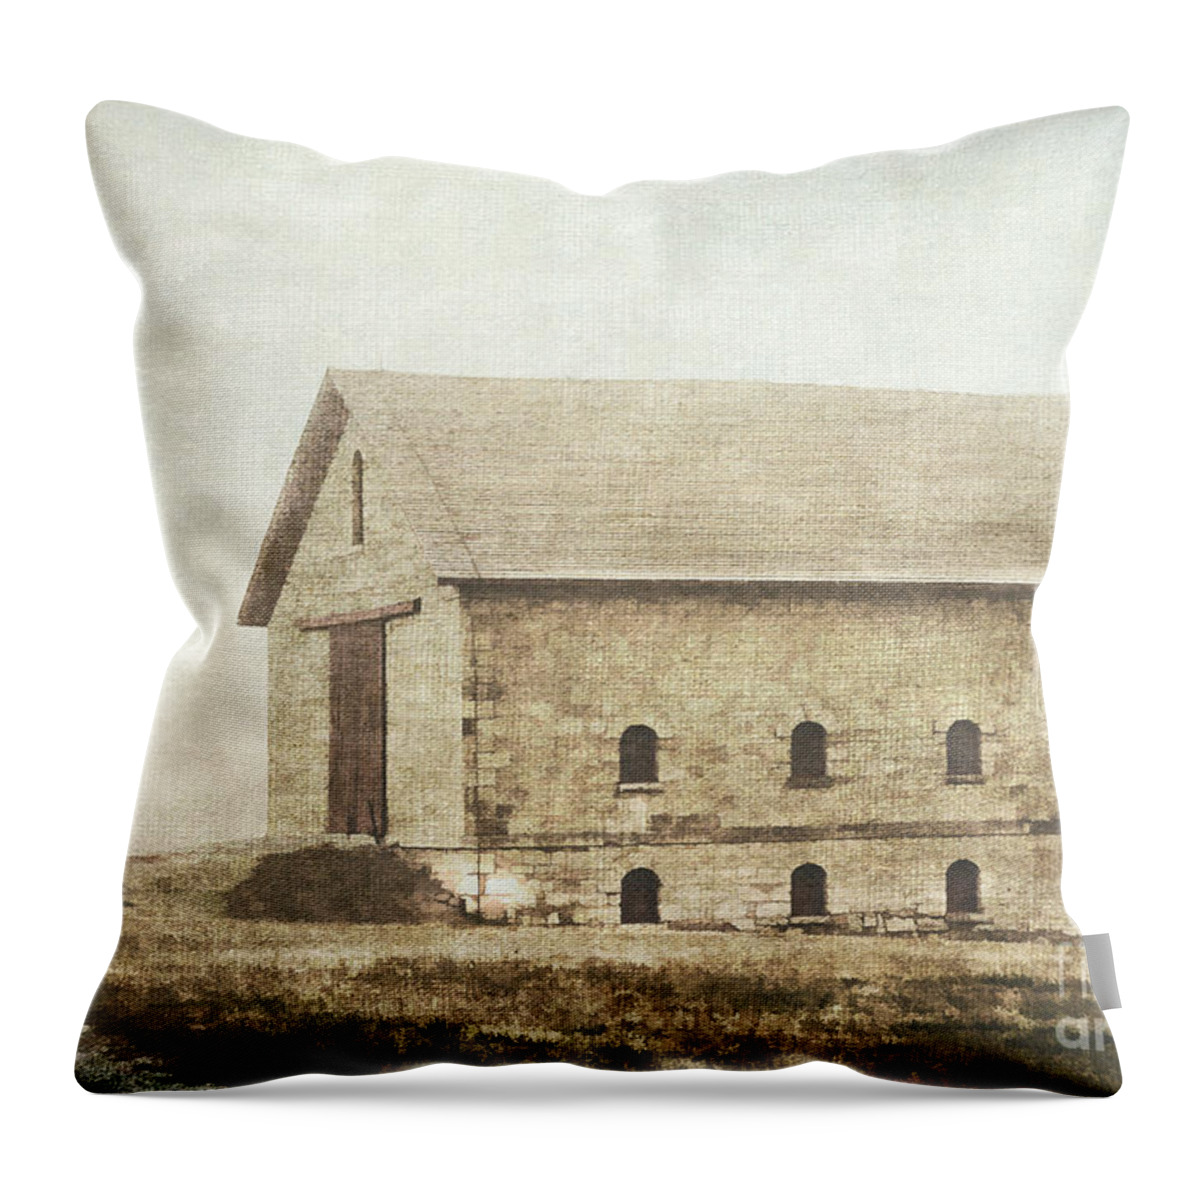 Barn Throw Pillow featuring the photograph Filley Stone Barn by Pam Holdsworth